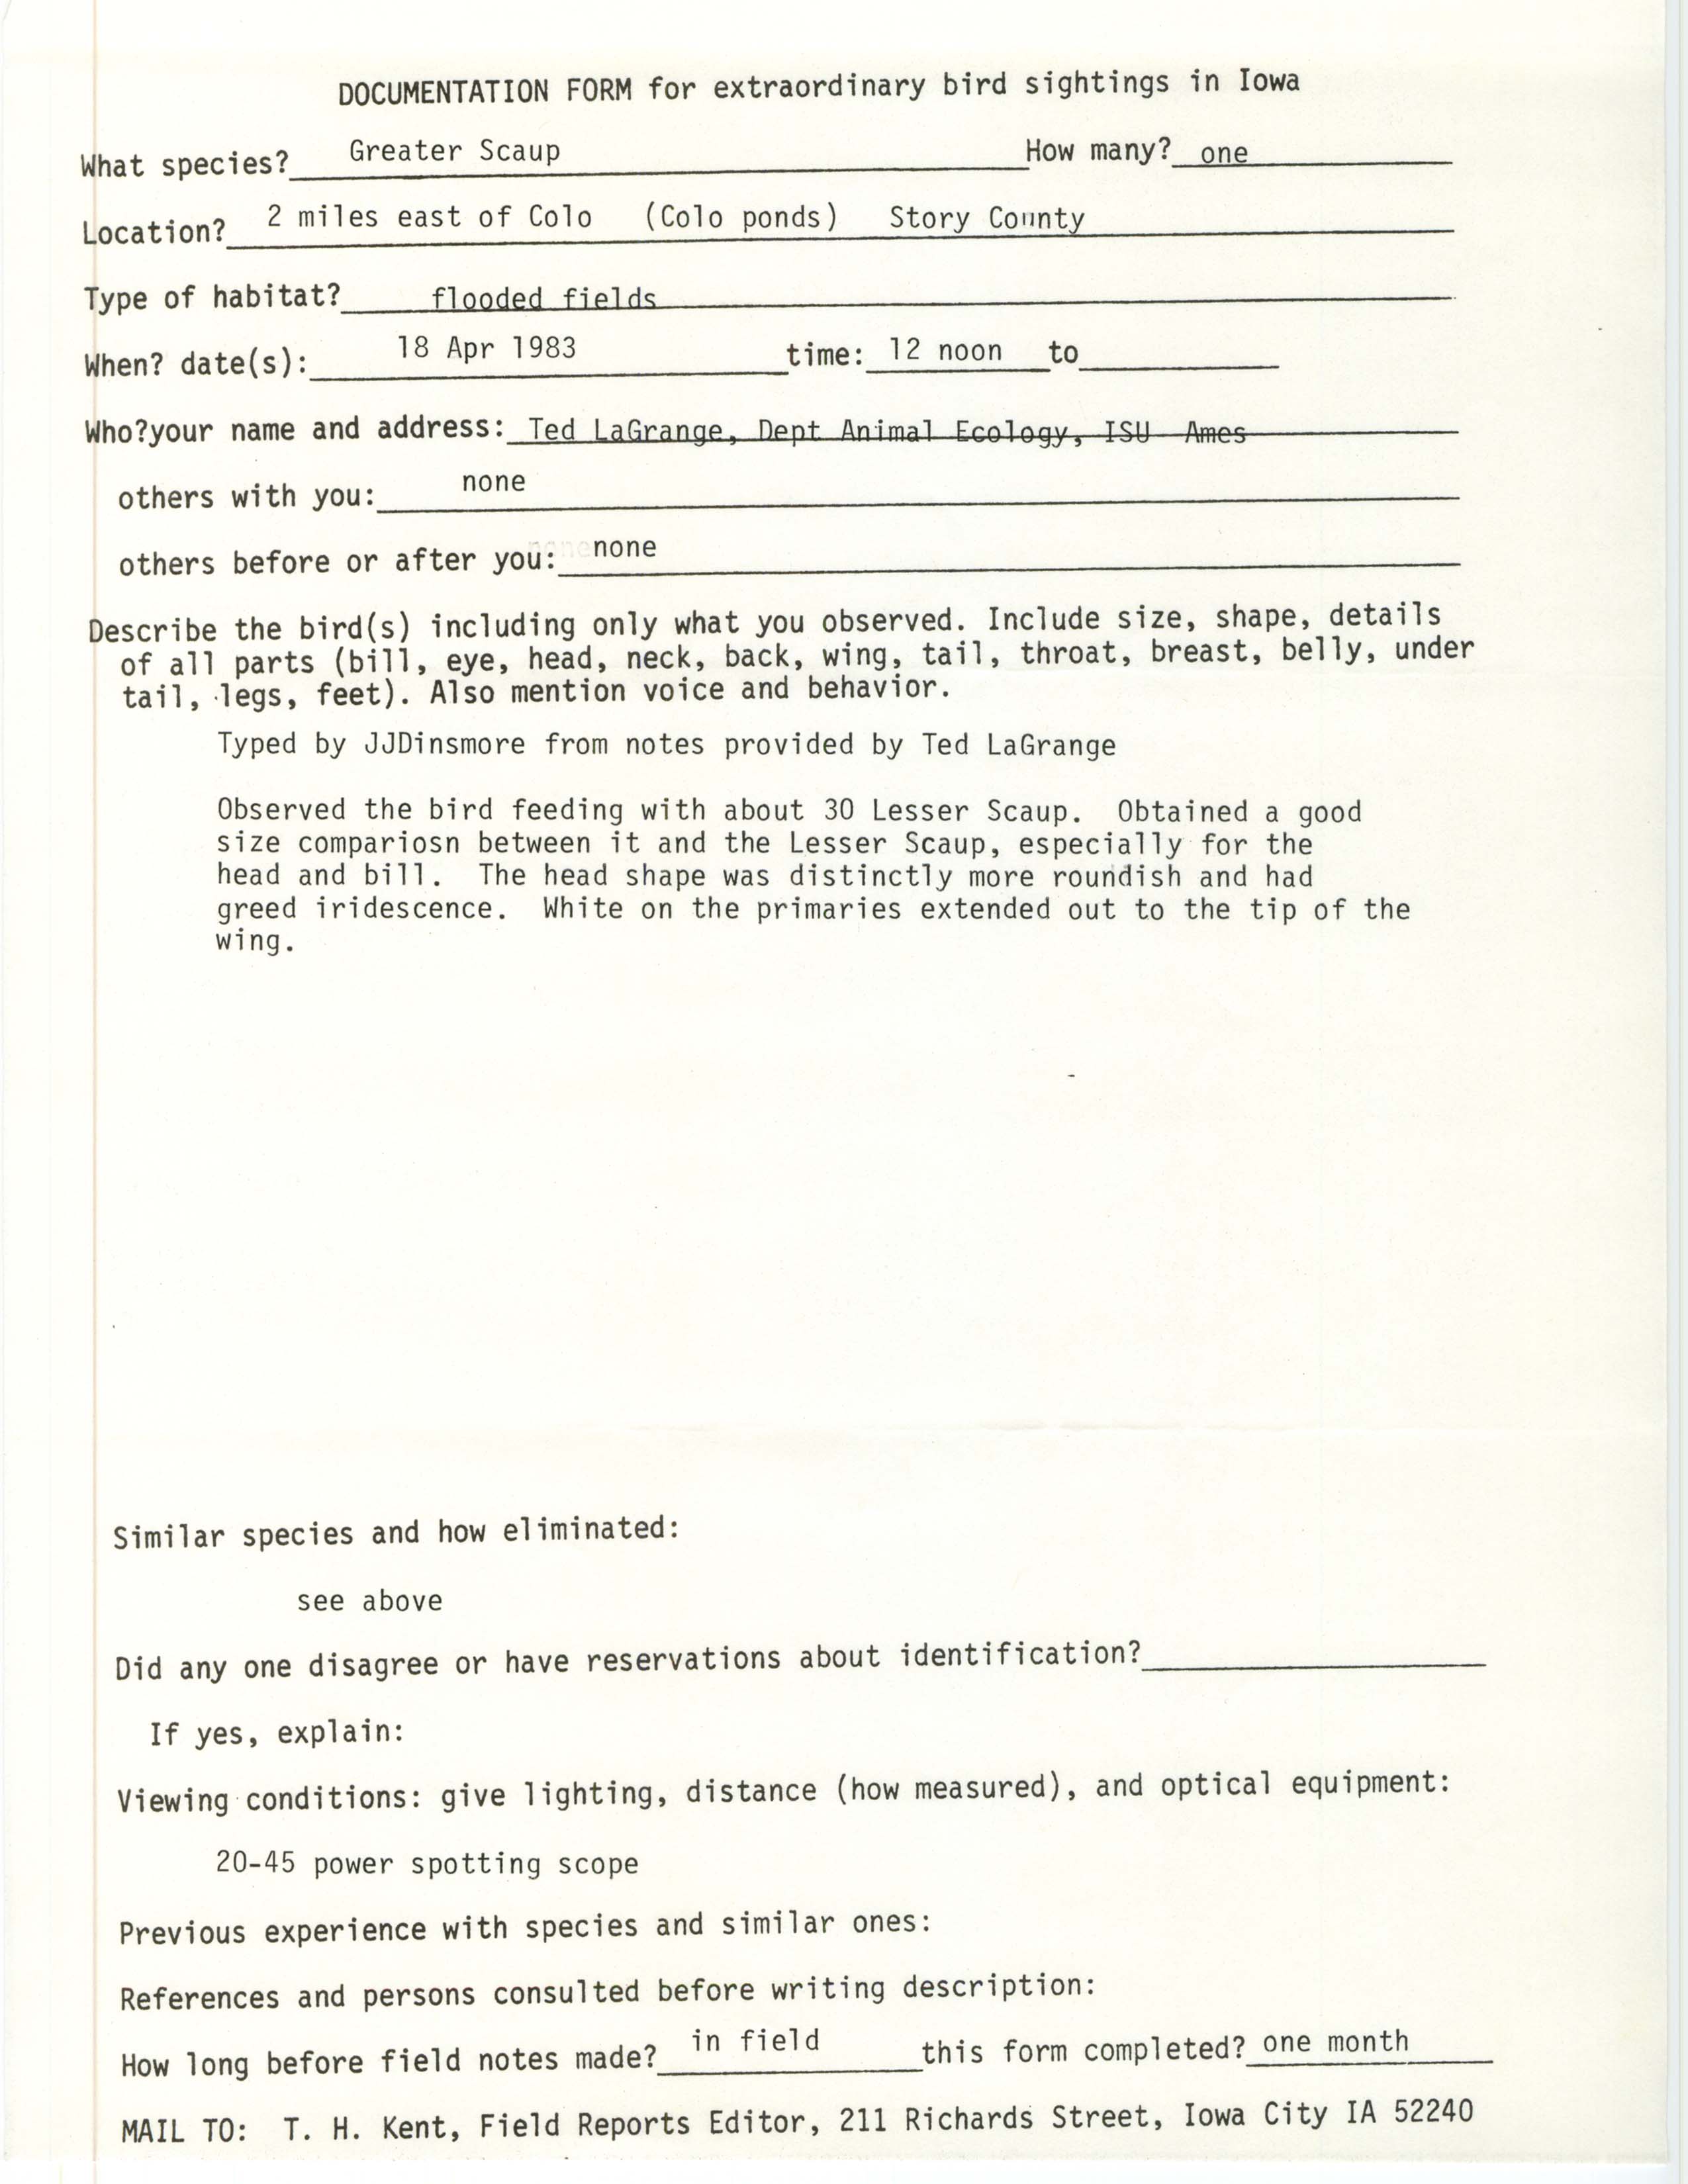 Rare bird documentation form for Greater Scaup at Colo Ponds, 1983